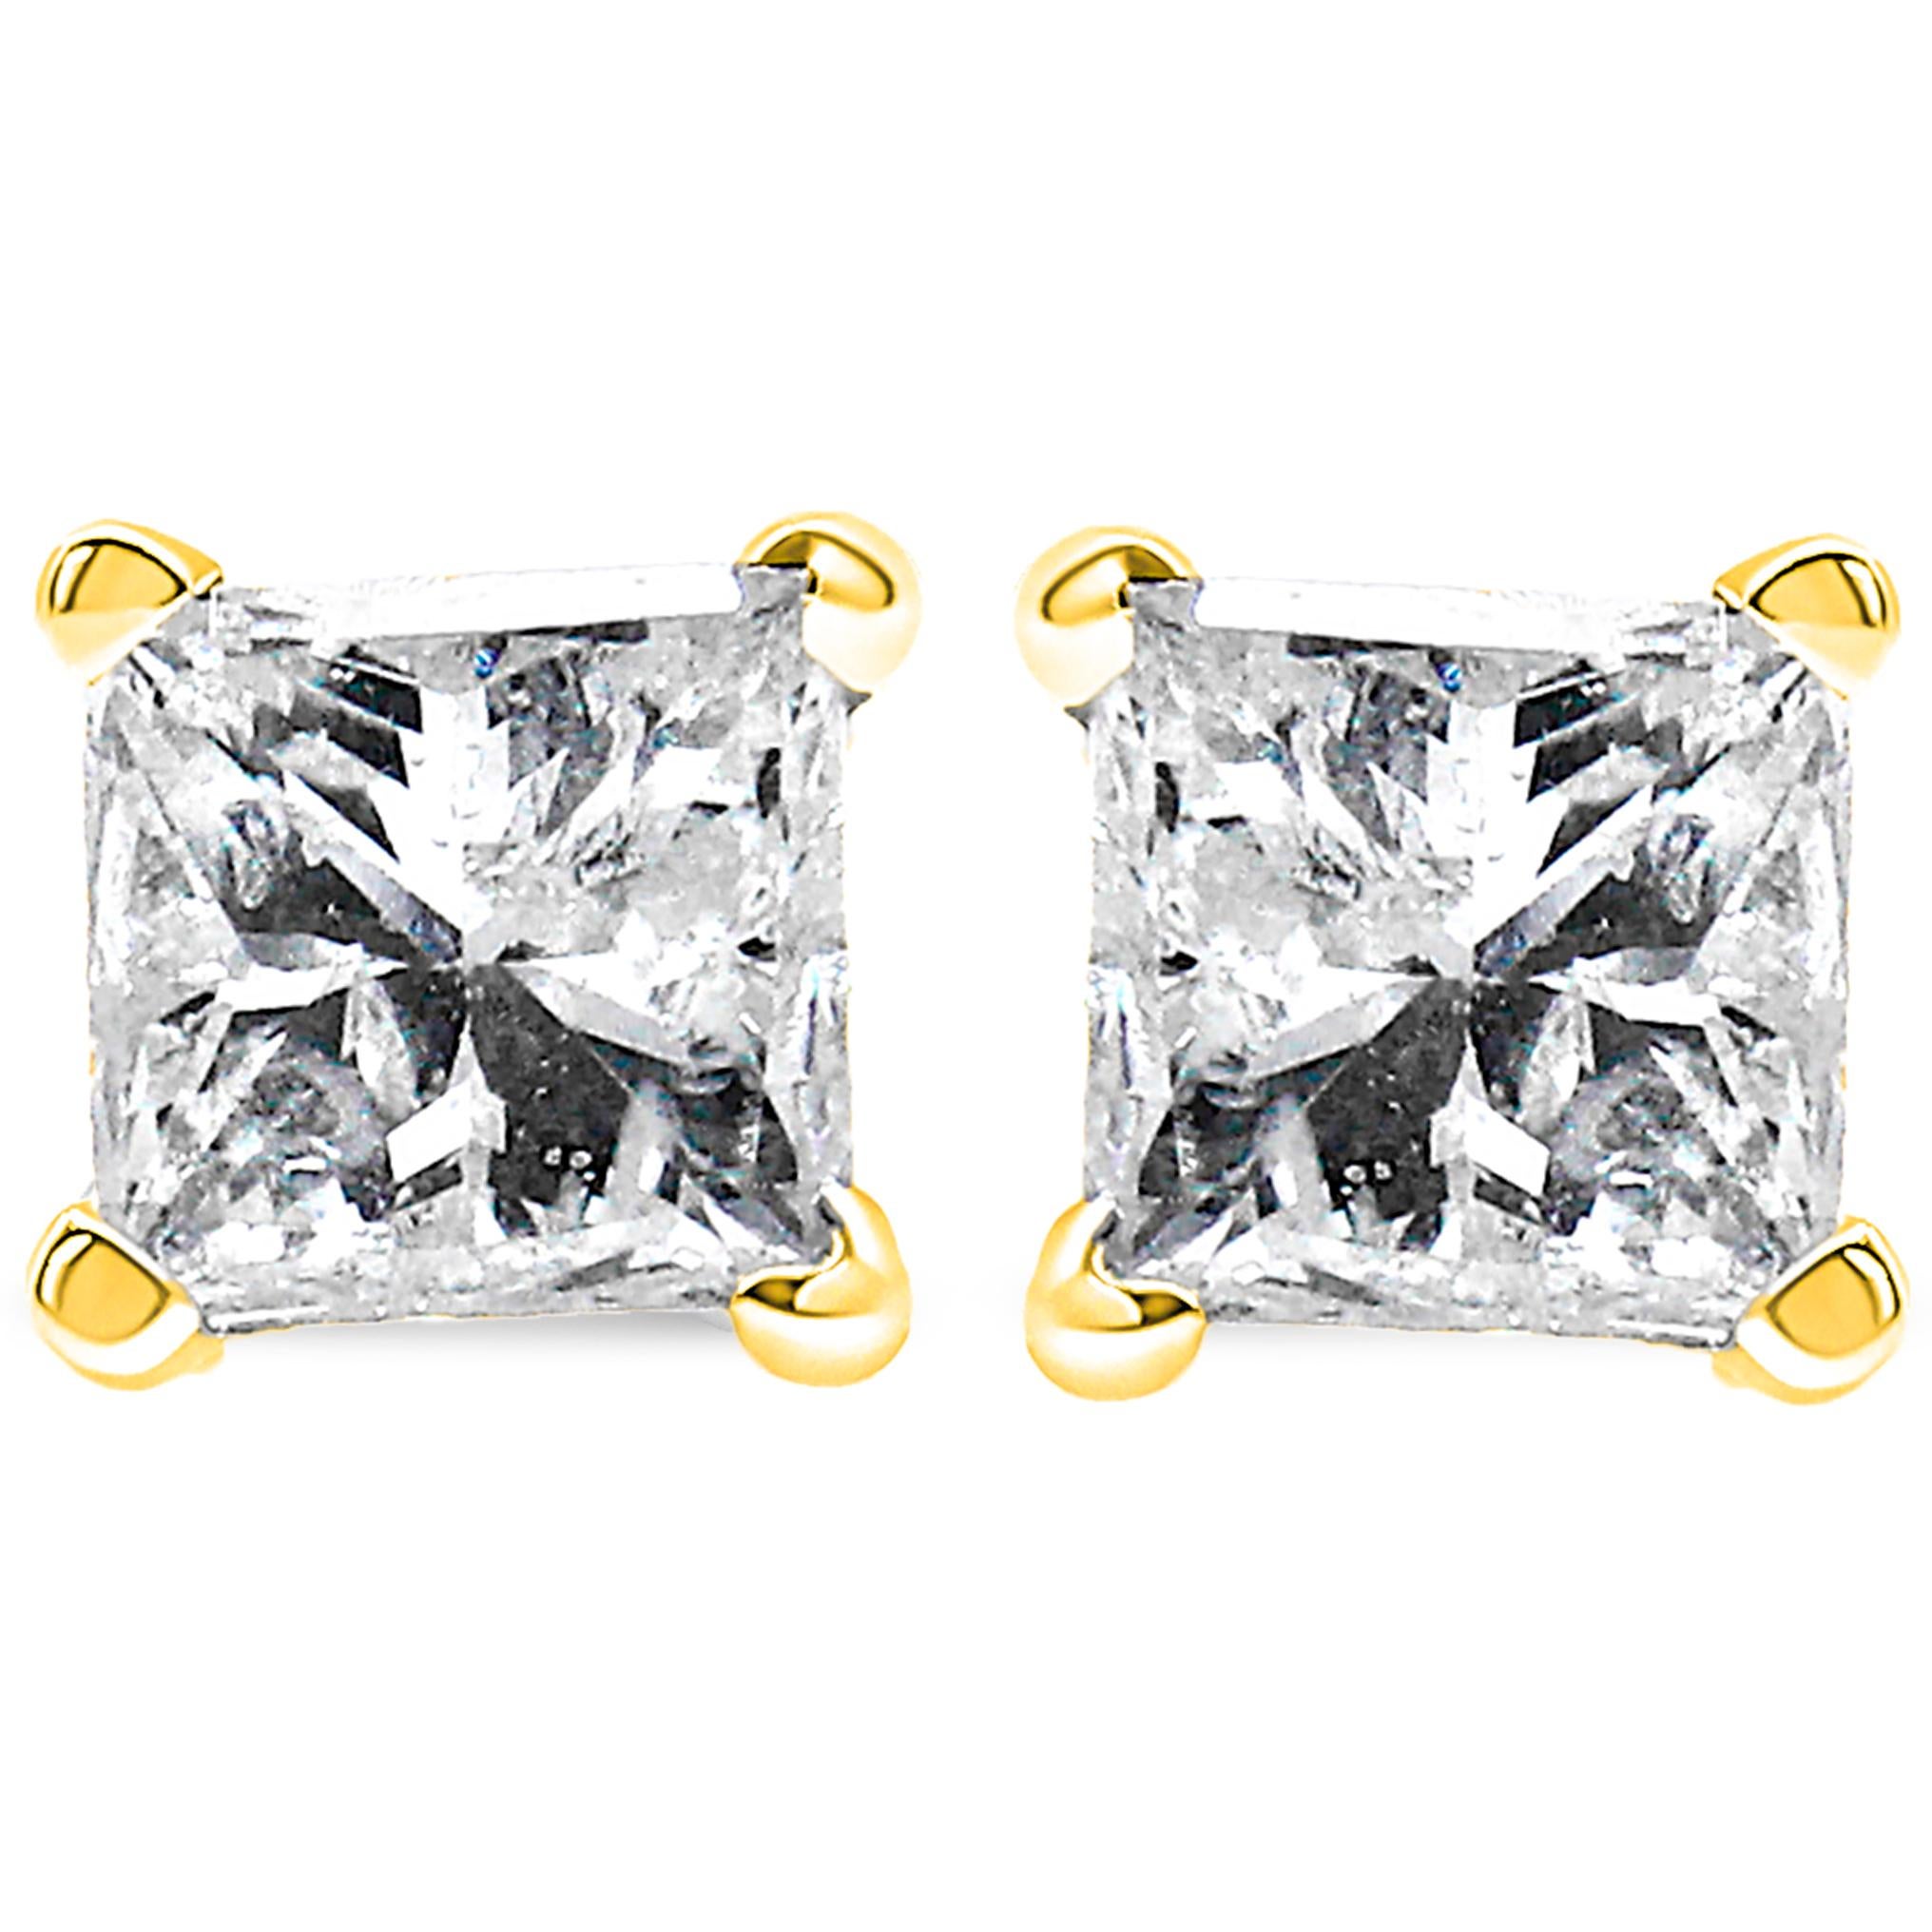 Two gorgeous near-colorless white princess cut diamonds sit in a prong setting on these sparkling stud earrings. Crafted in lustrous 14kt yellow gold, these diamond stud earrings feature a high polish finish. These stunning gold earrings feature